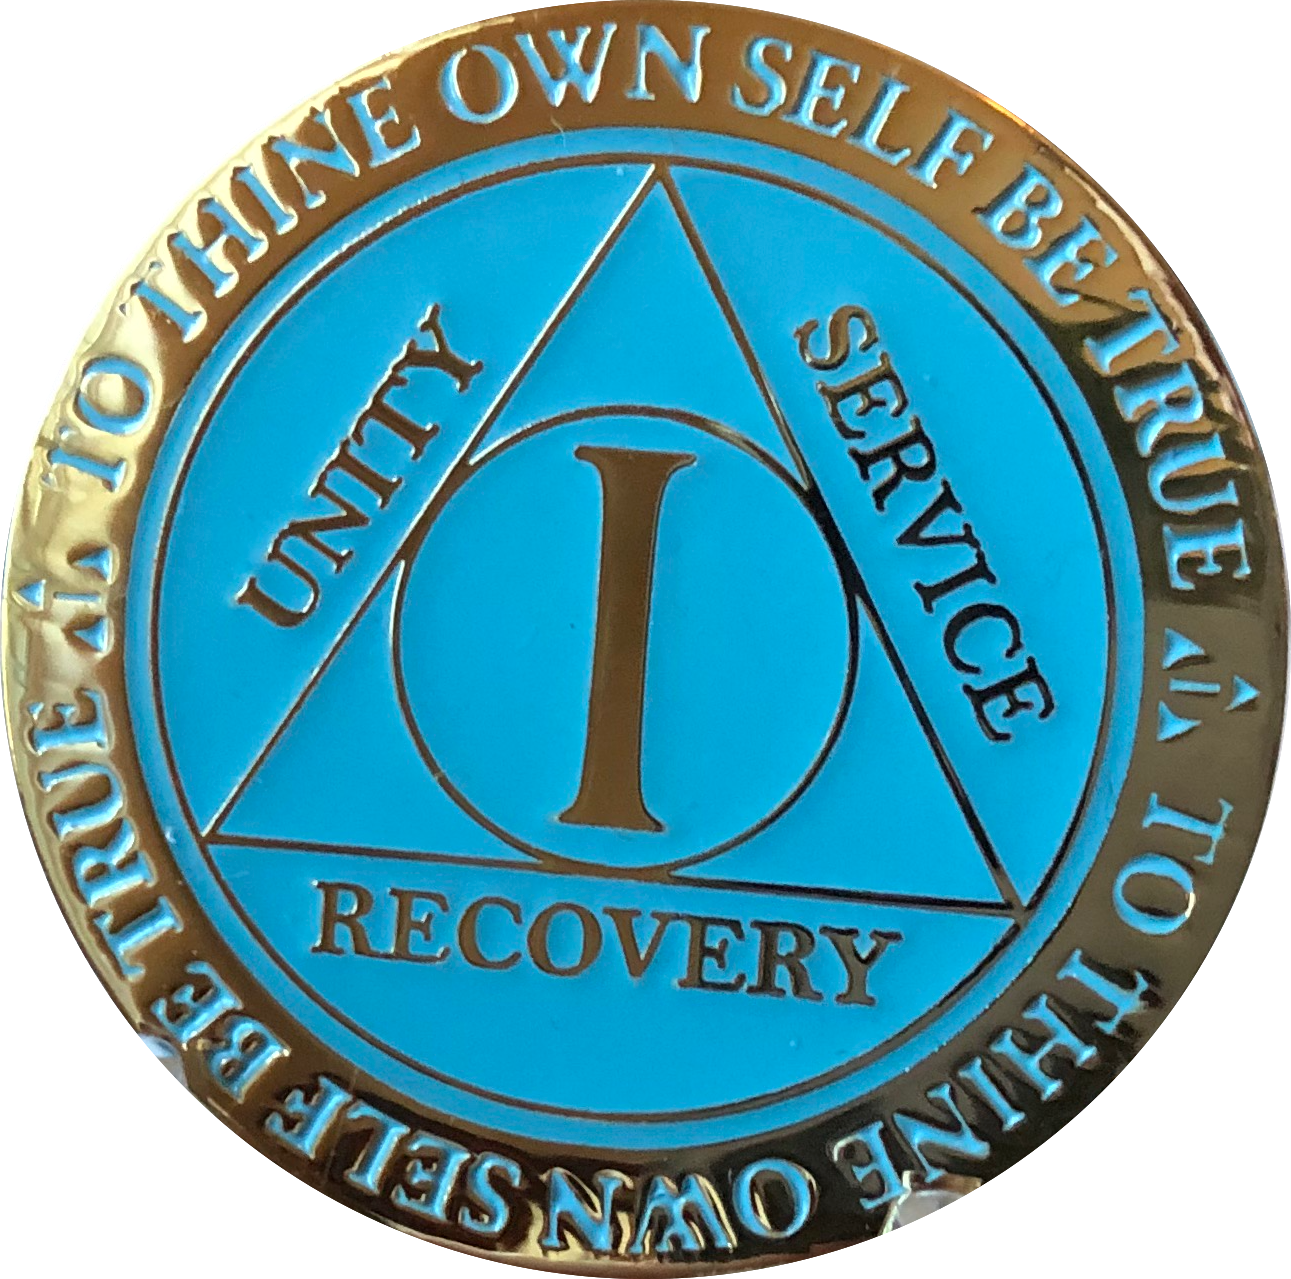 1 Year AA Medallion Reflex Glow In The Dark Gold Plated Blue Sobriety Chip - RecoveryChip